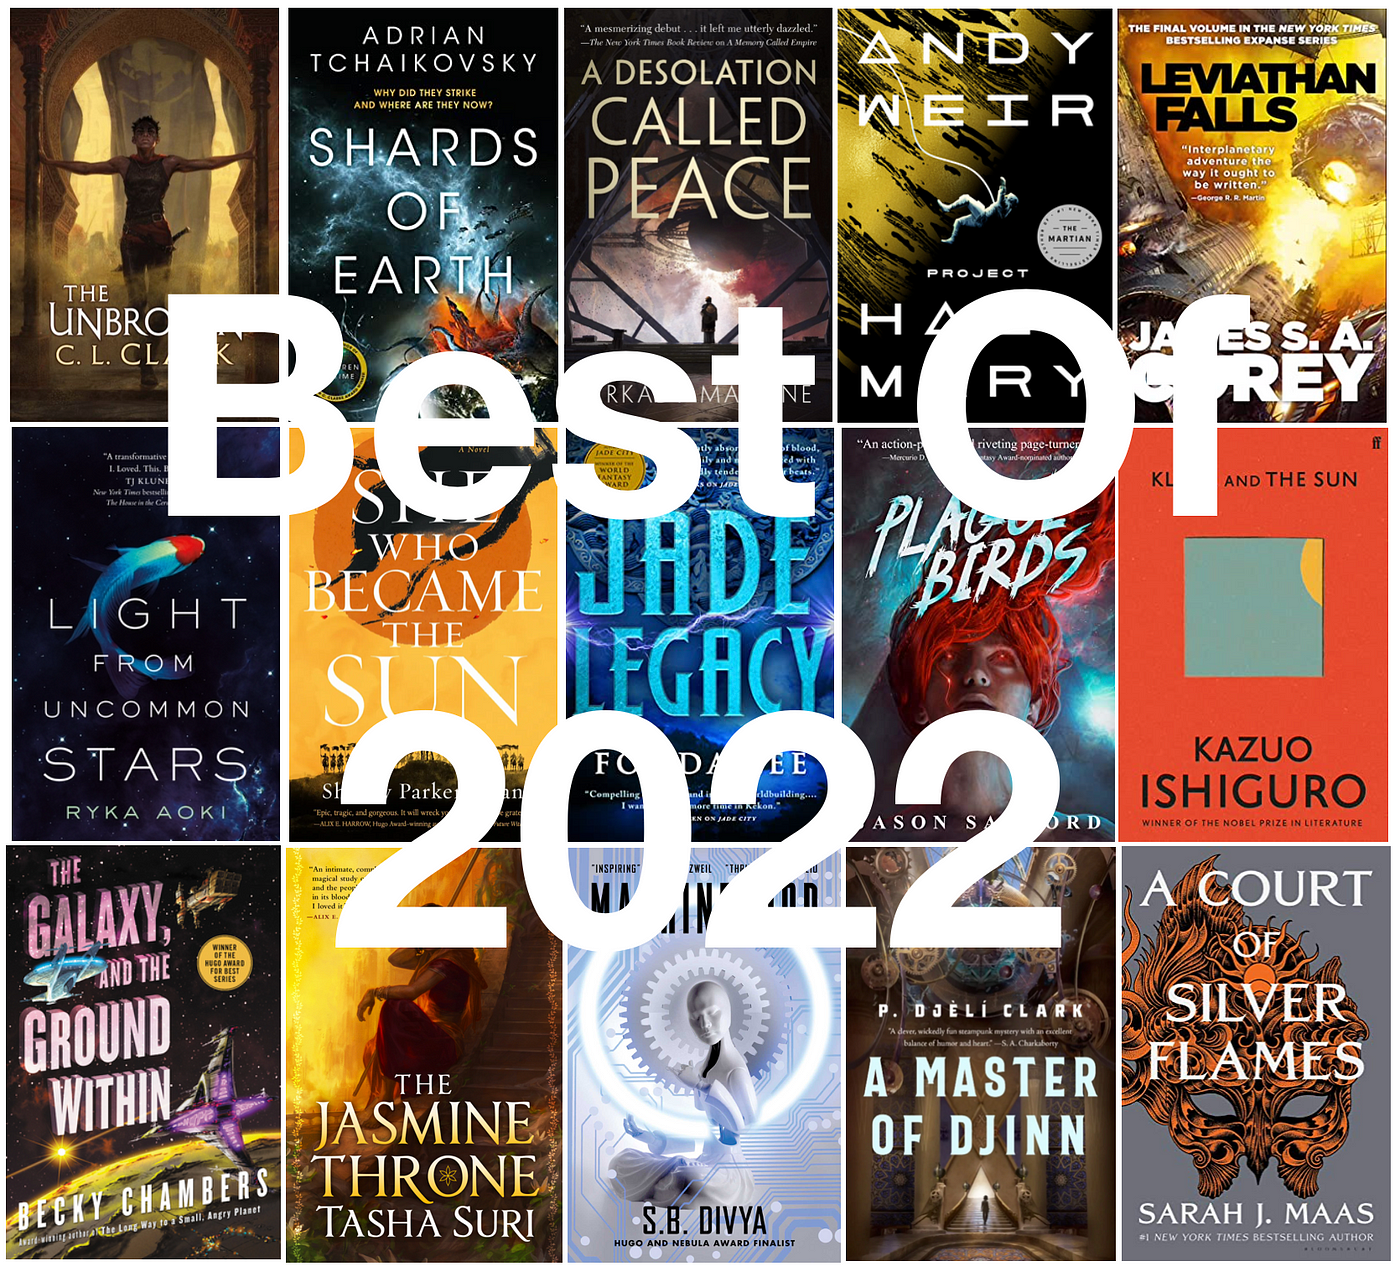 The best science fiction & fantasy books of 2022